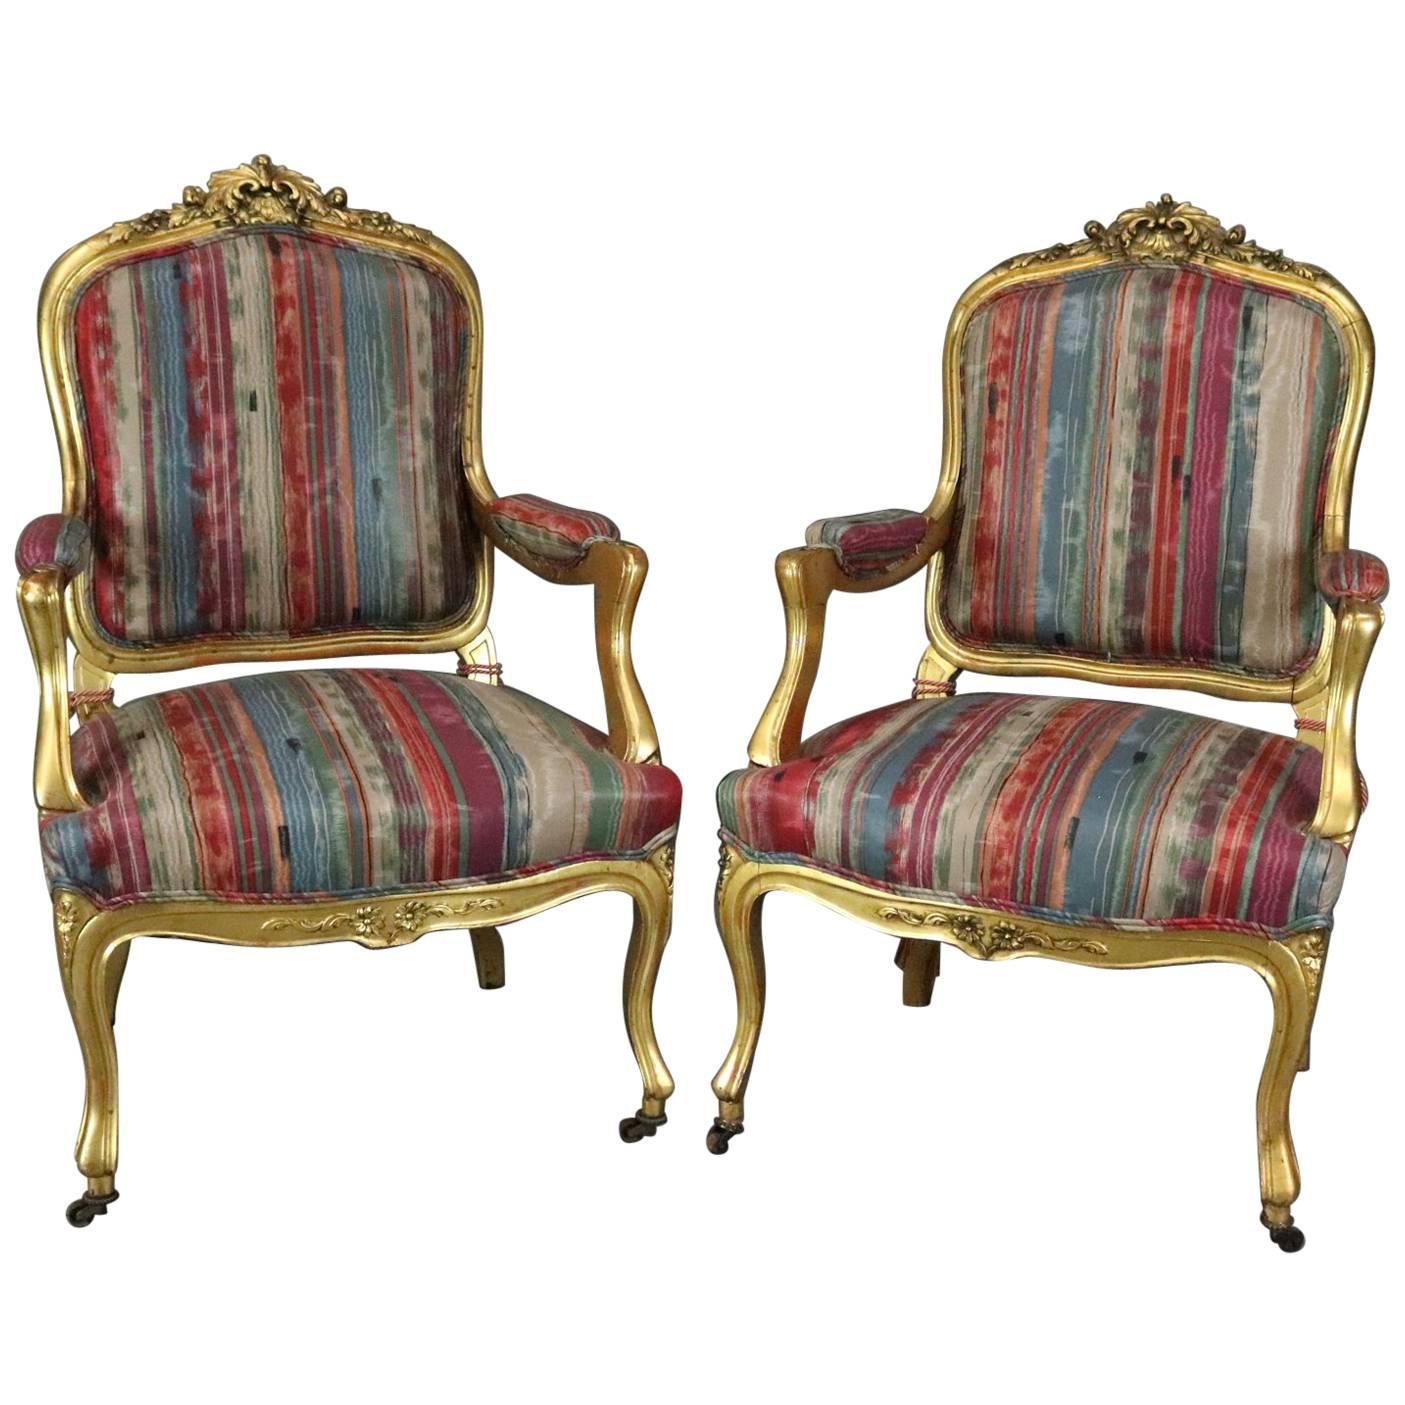 Pair Antique French Louis XIV Style Carved Giltwood Upholstered Armchairs, c1870